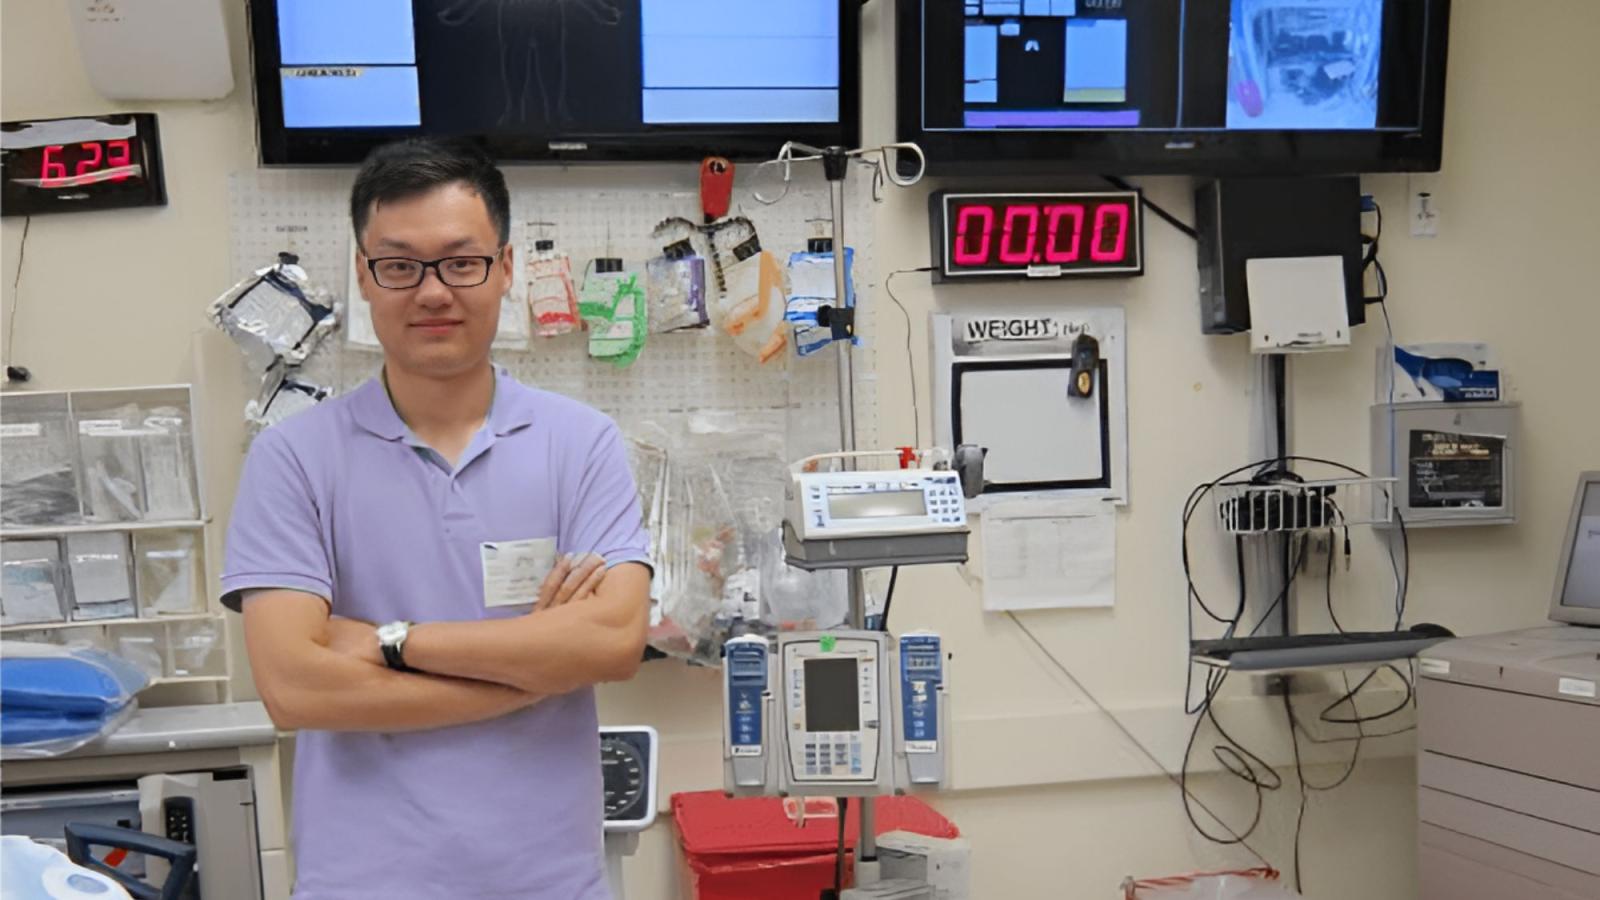 Seidenberg professor Dr. Zhan Zhang posing for a photo in front of medical equipment.